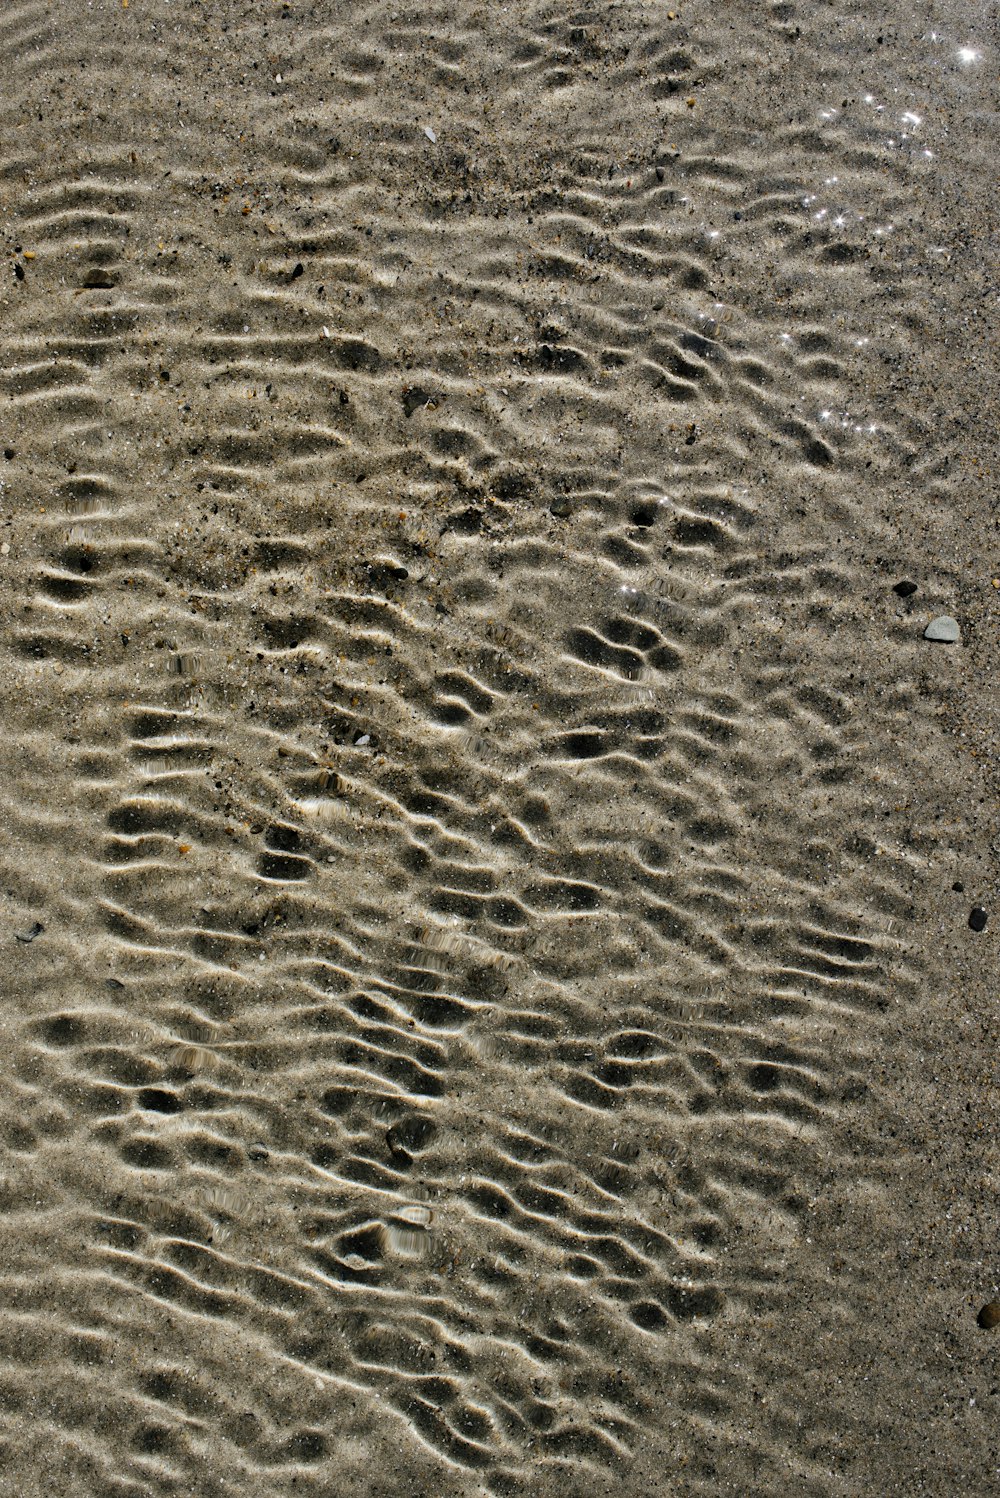 a sandy beach with footprints in the sand